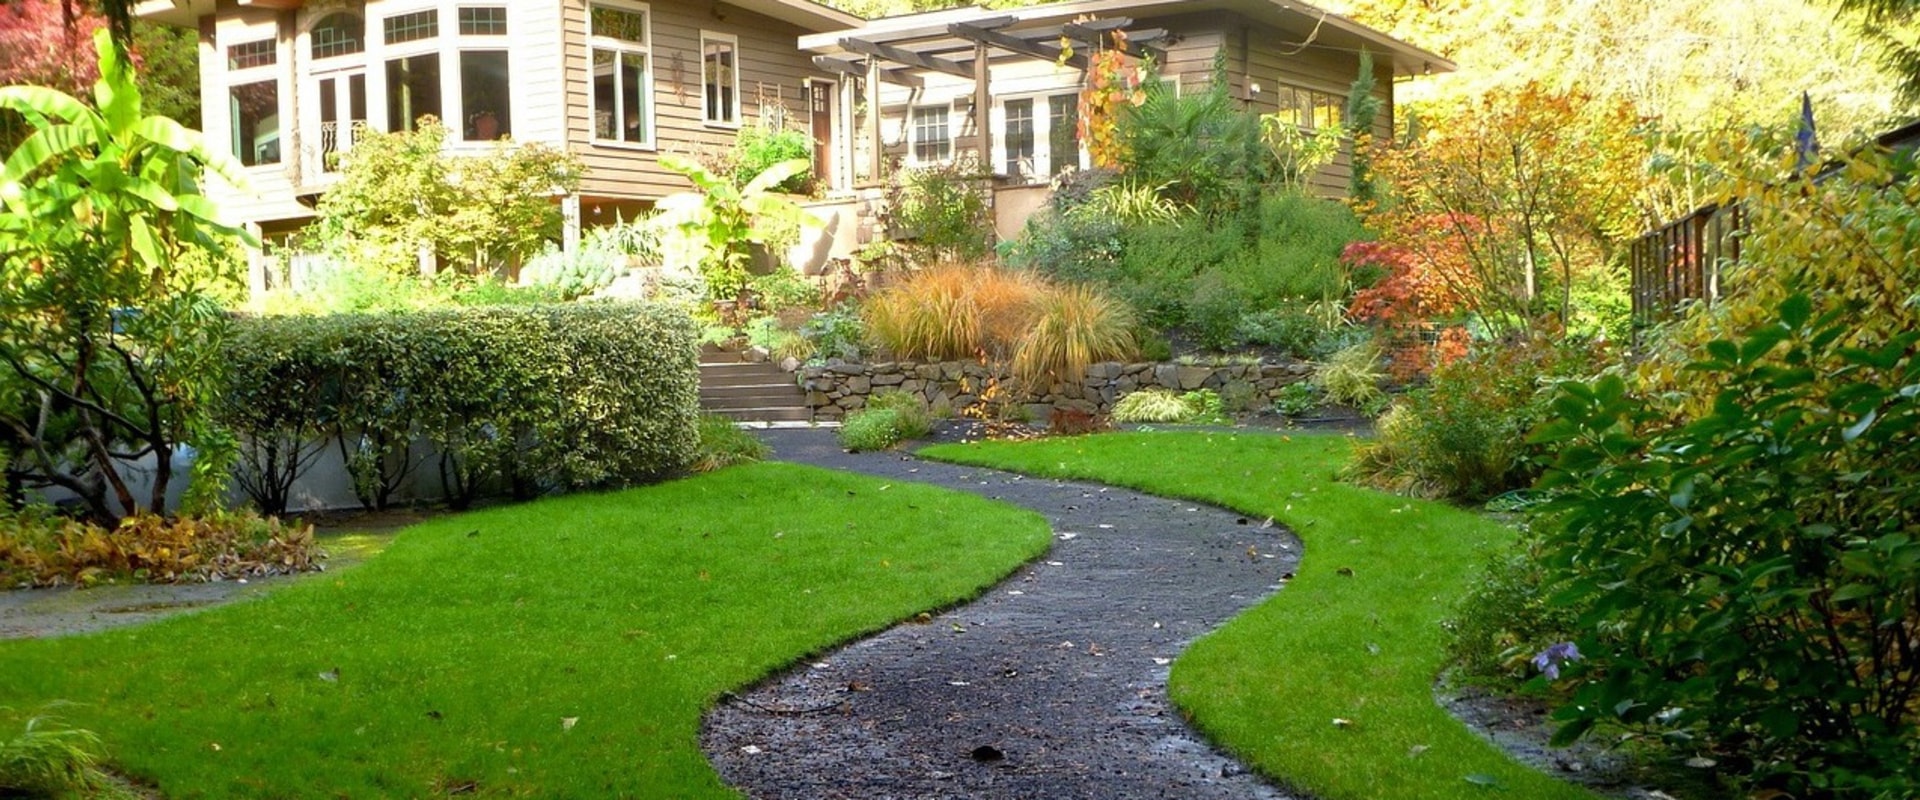 How To Get The Best Results Out Of Your Landscaping Project In Austin With Asphalt Paving